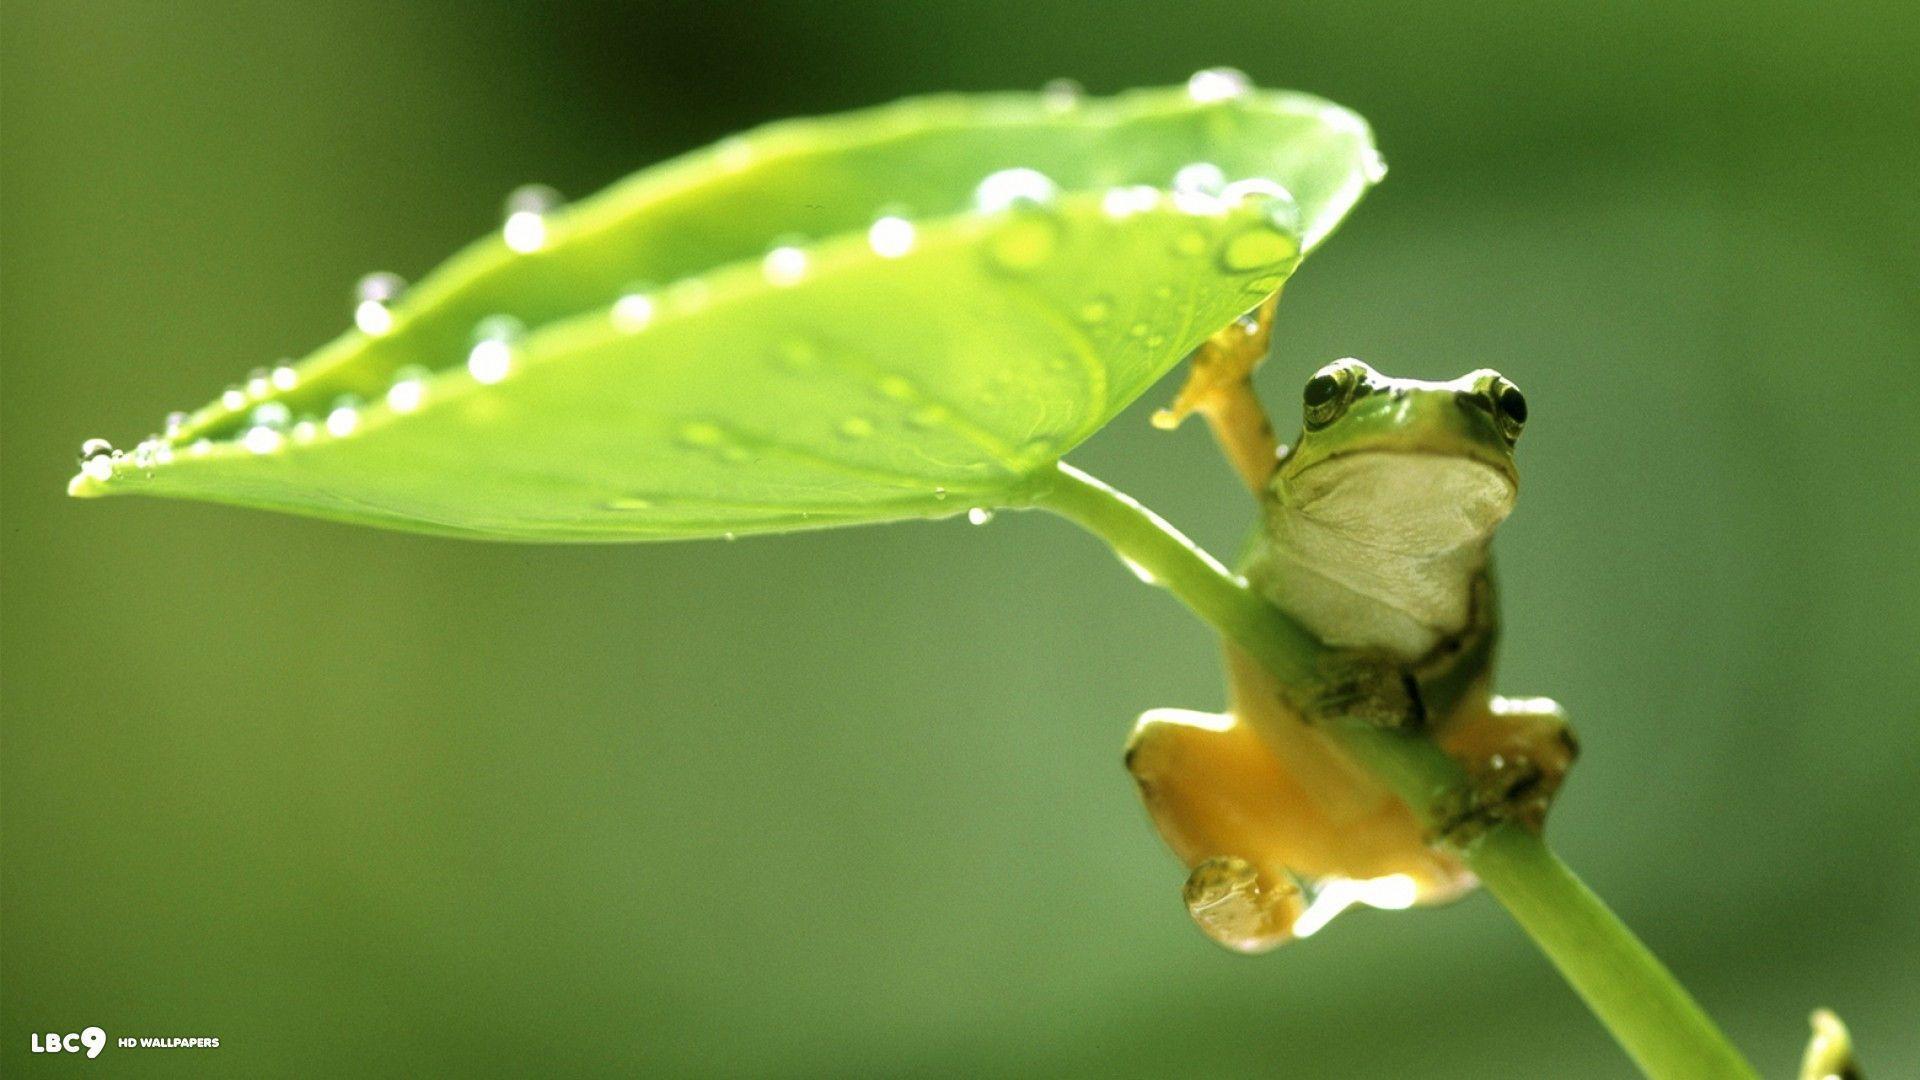 Frog Wallpaper 65 86. Reptiles And Amphibians HD Background